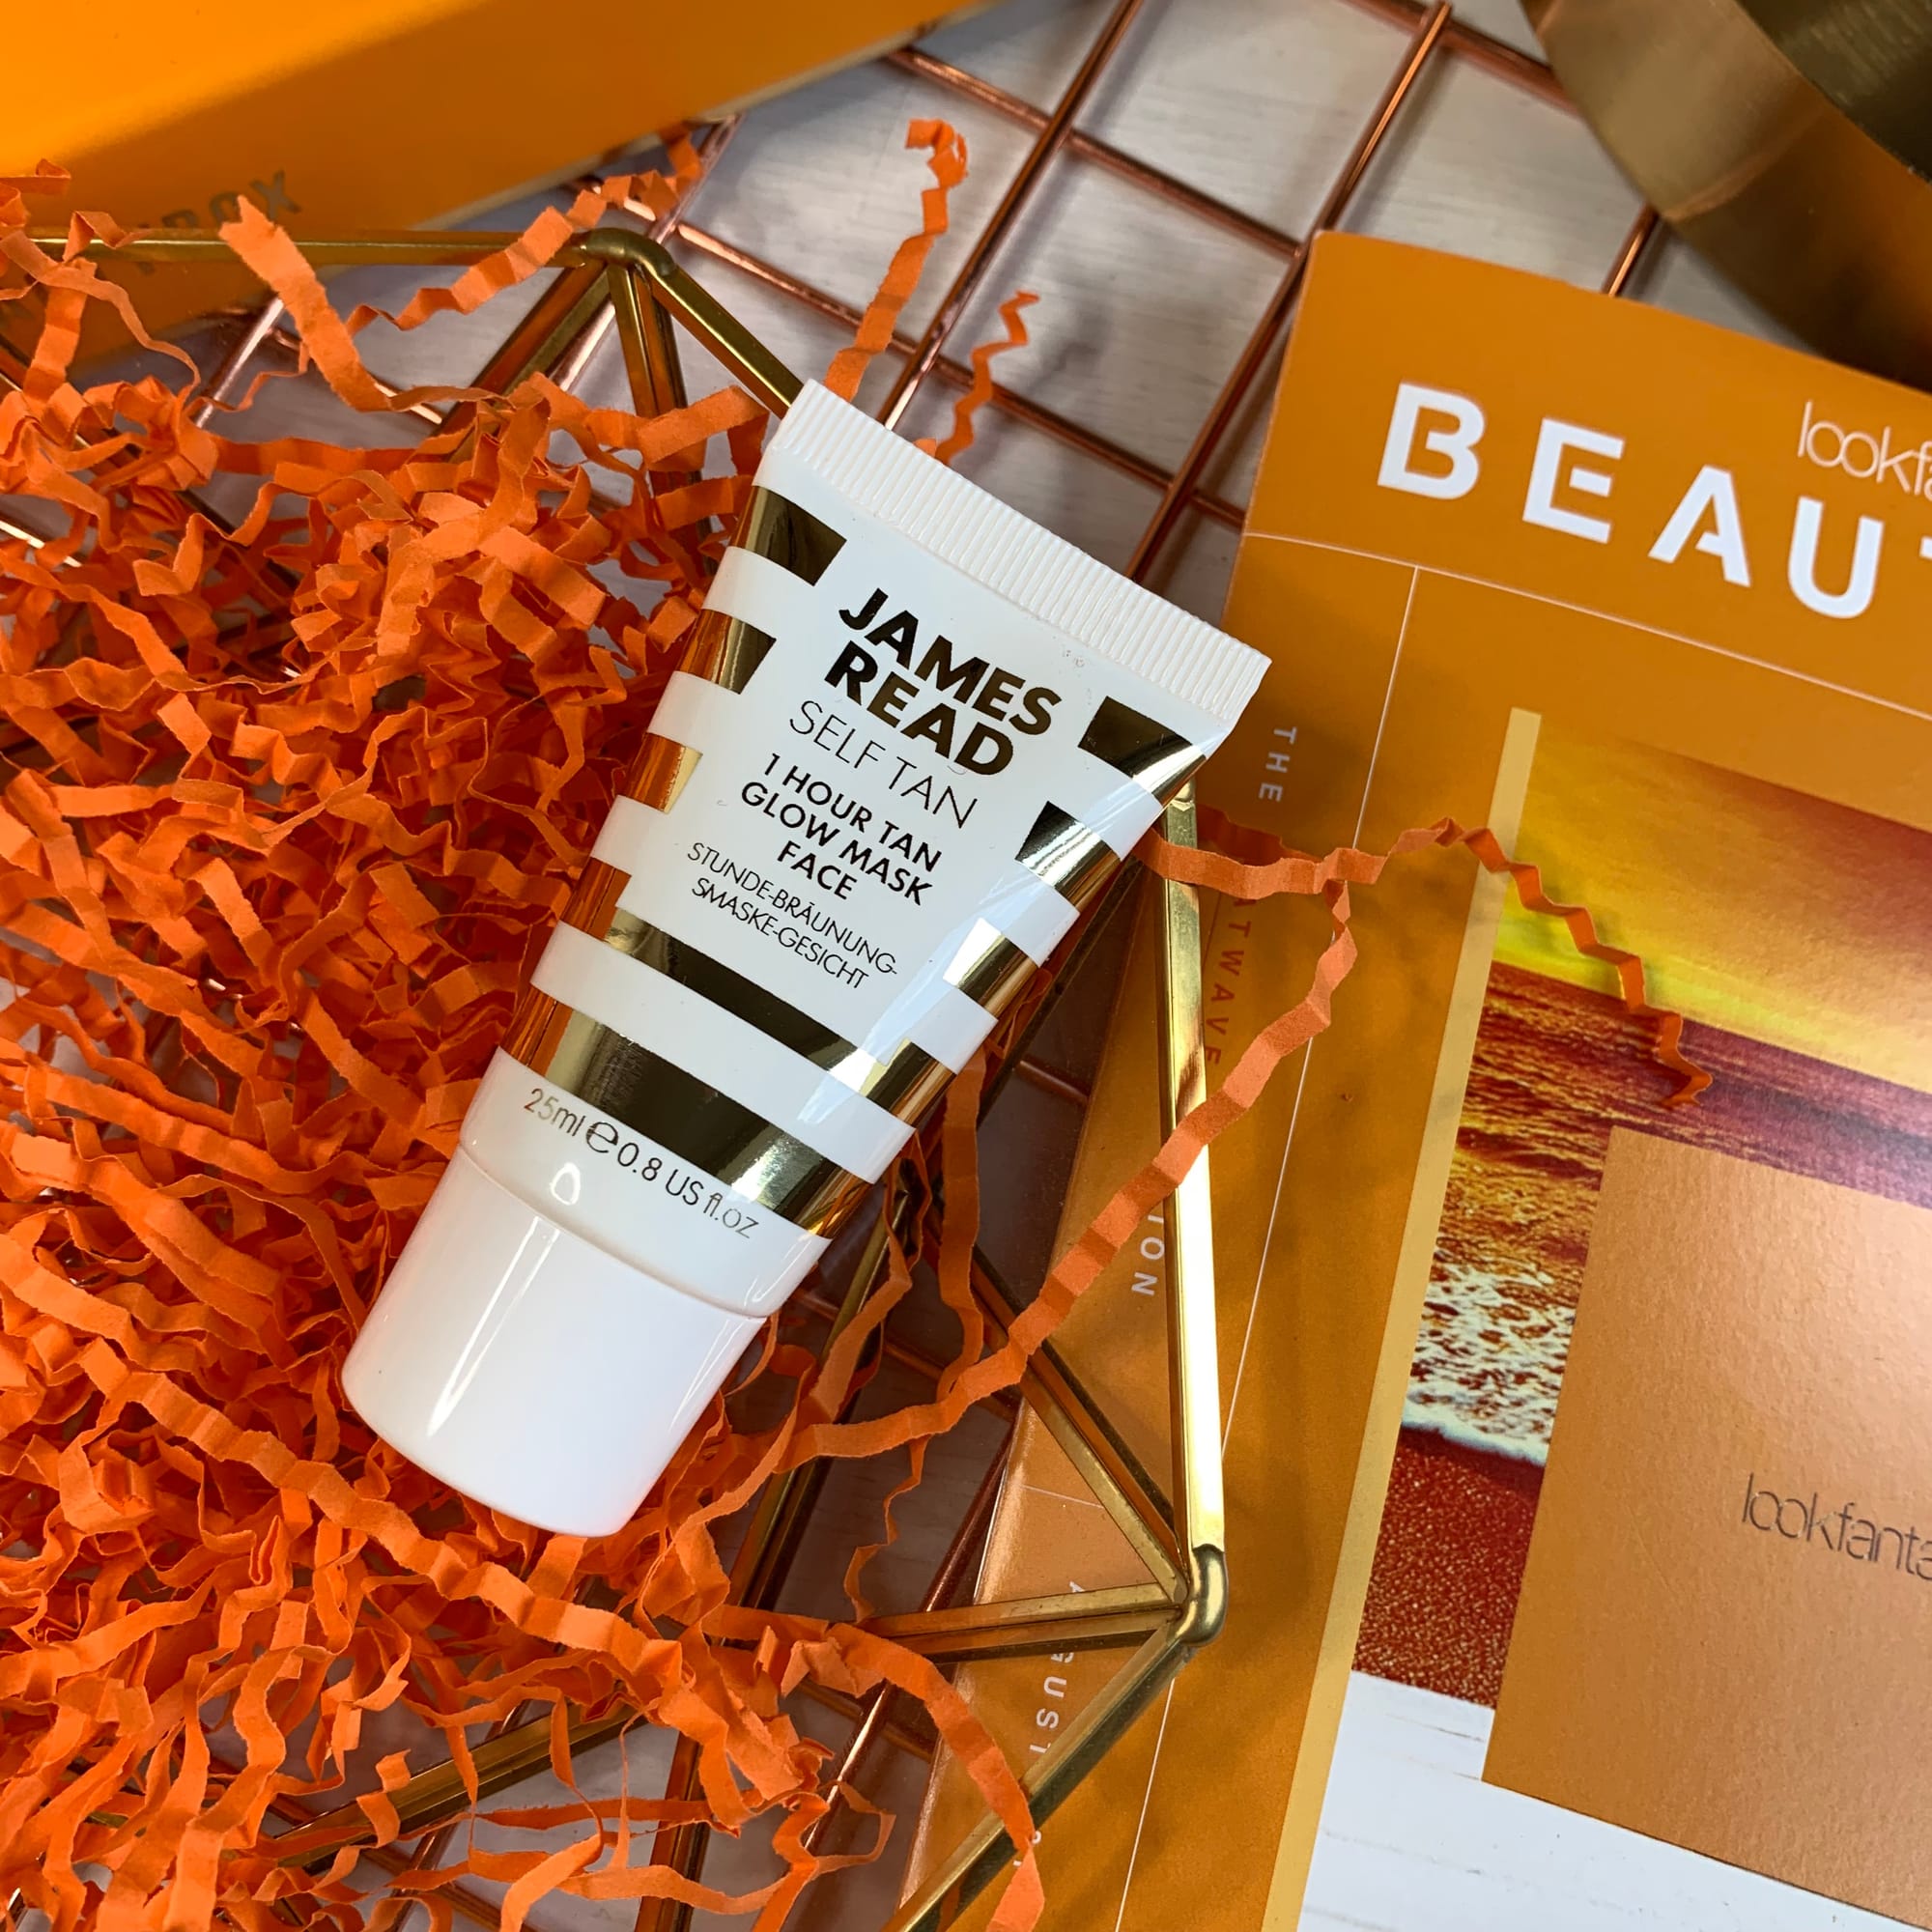 James Read 1 Hour Glow Self Tan Face - Look Fantastic Beauty Box Review - August 2019 - Miss Boux